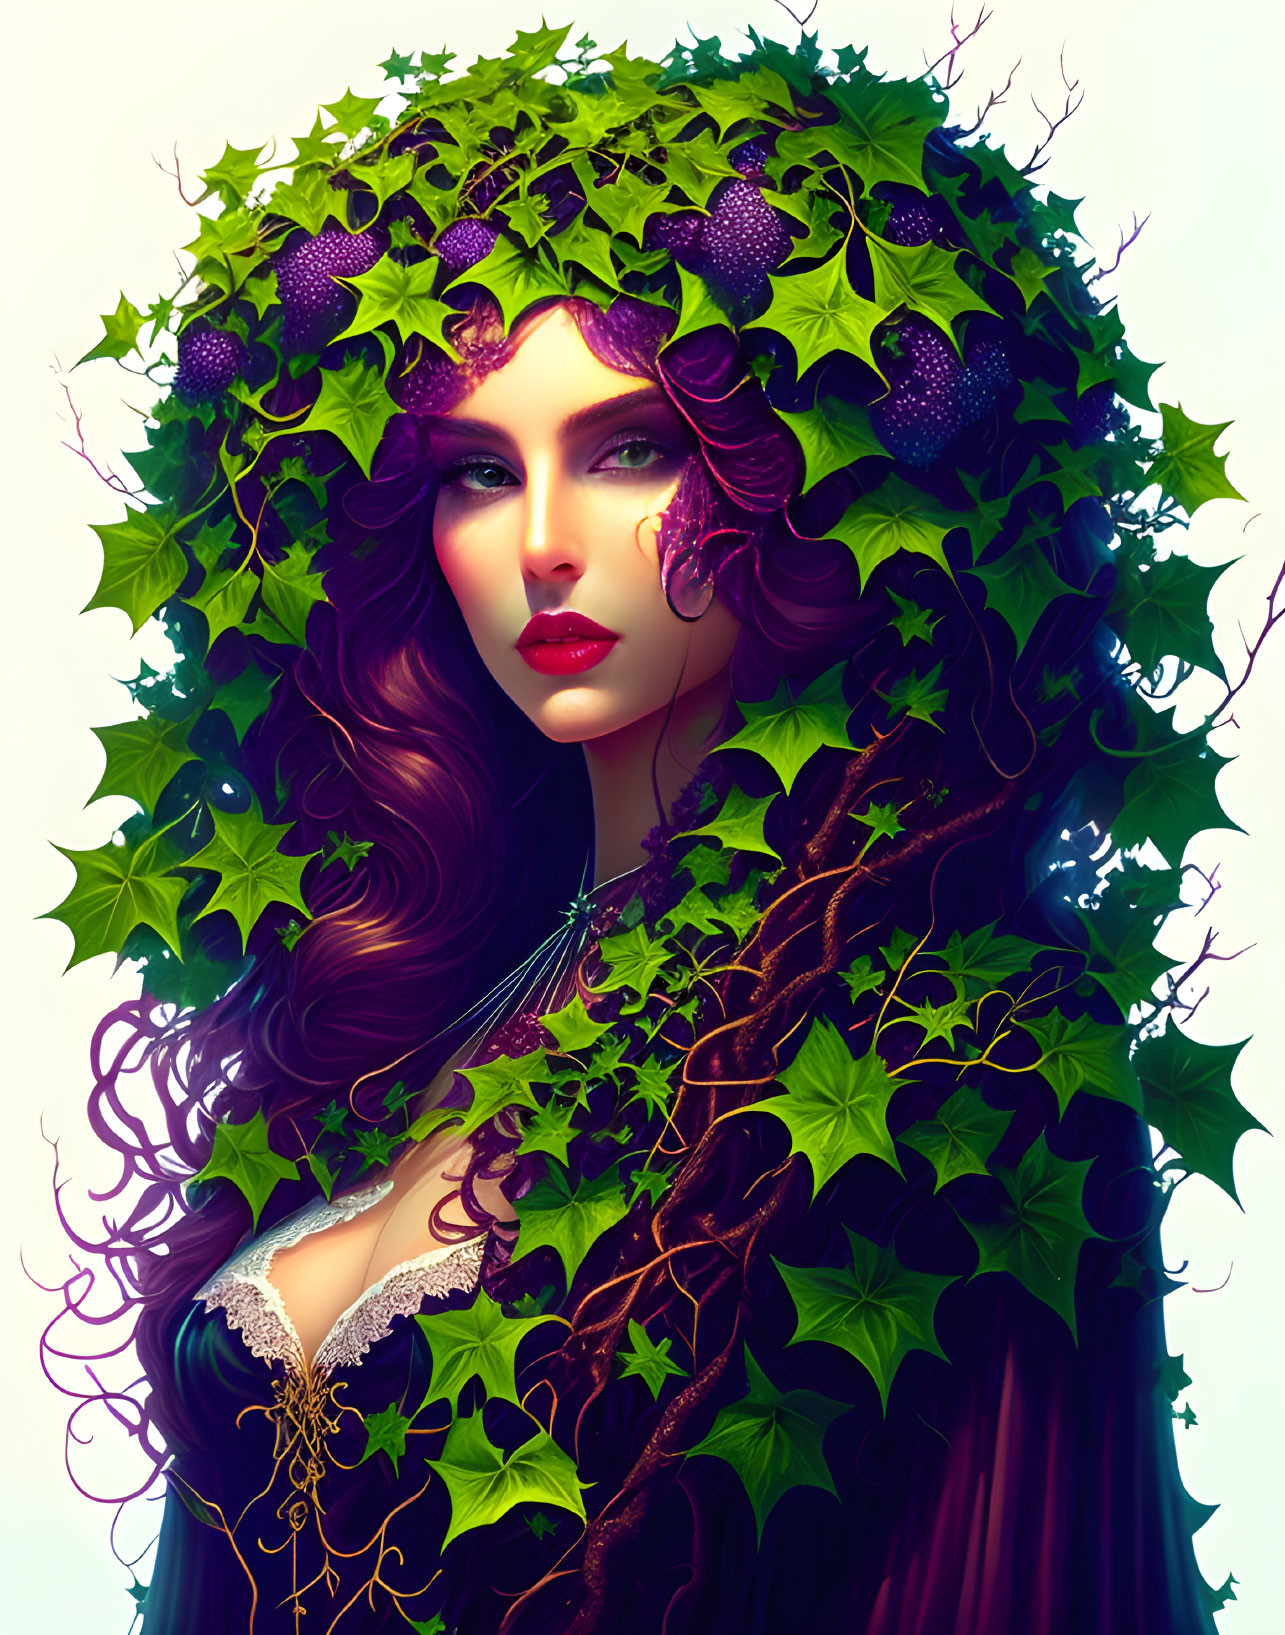 Illustrated woman with curly hair adorned with green leaves and berries in a mystical forest theme